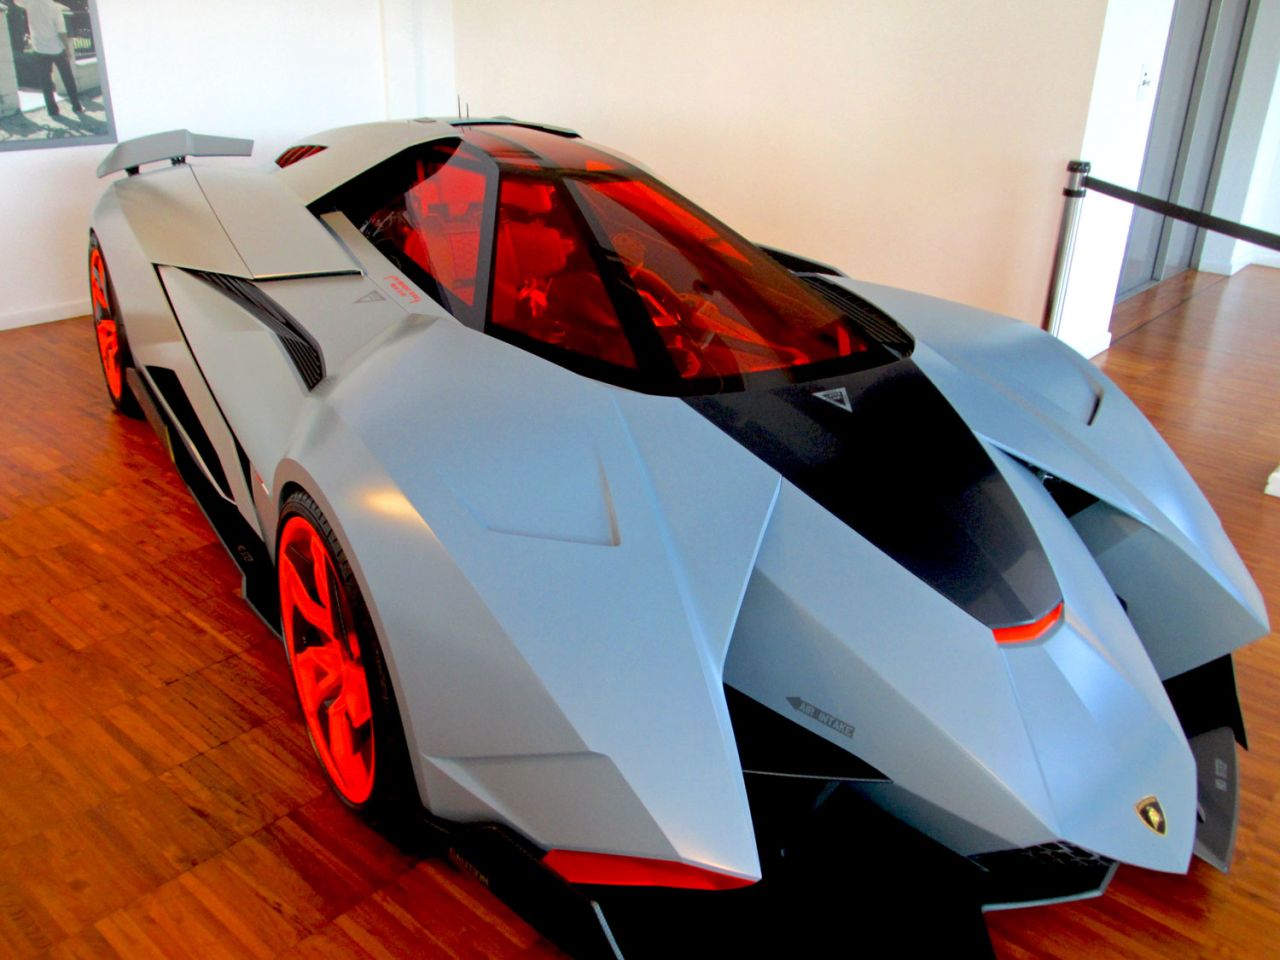 Resembling a jet fighter or an Apache attack helicopter, this 2013 Lamborghini Egoista single seater, on display at the Lamborghini Museum in Sant'Agata Bolognese features an anti-radar material.